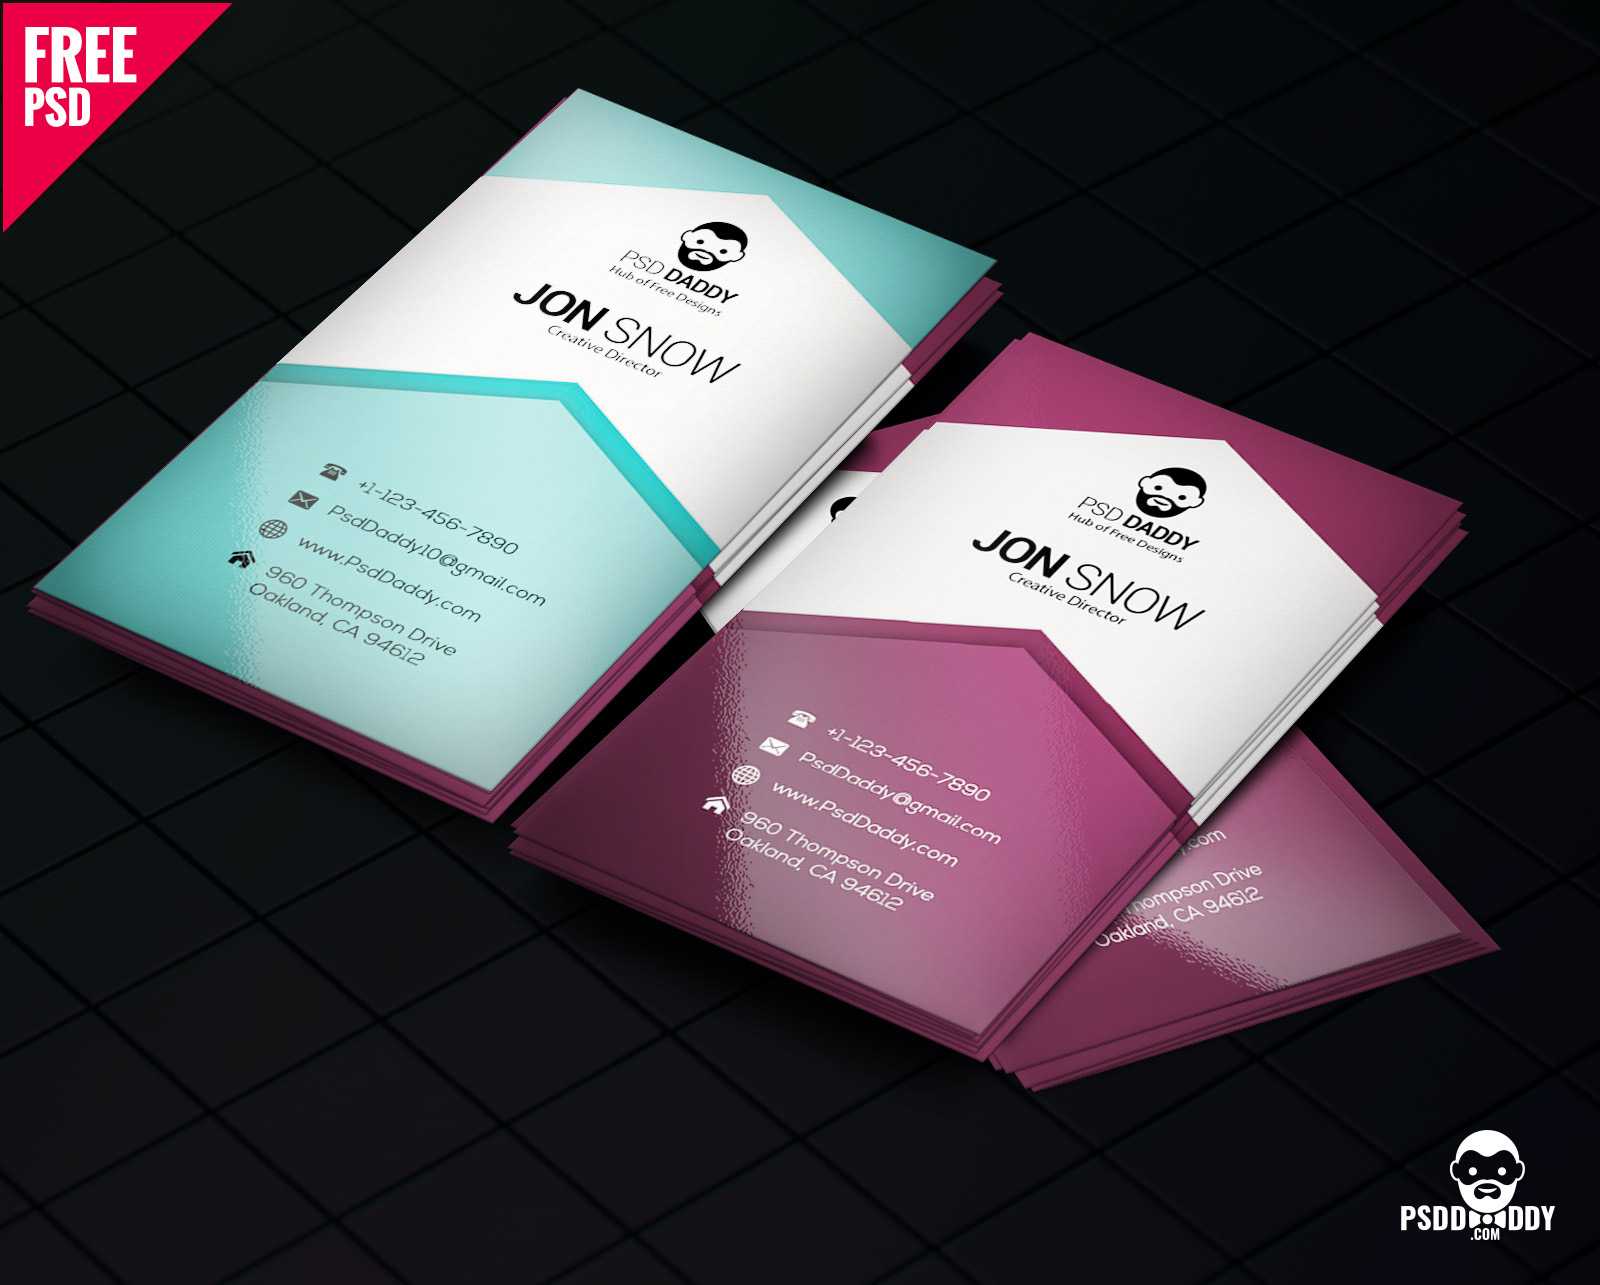 Download]Creative Business Card Psd Free | Psddaddy Throughout Iphone Business Card Template